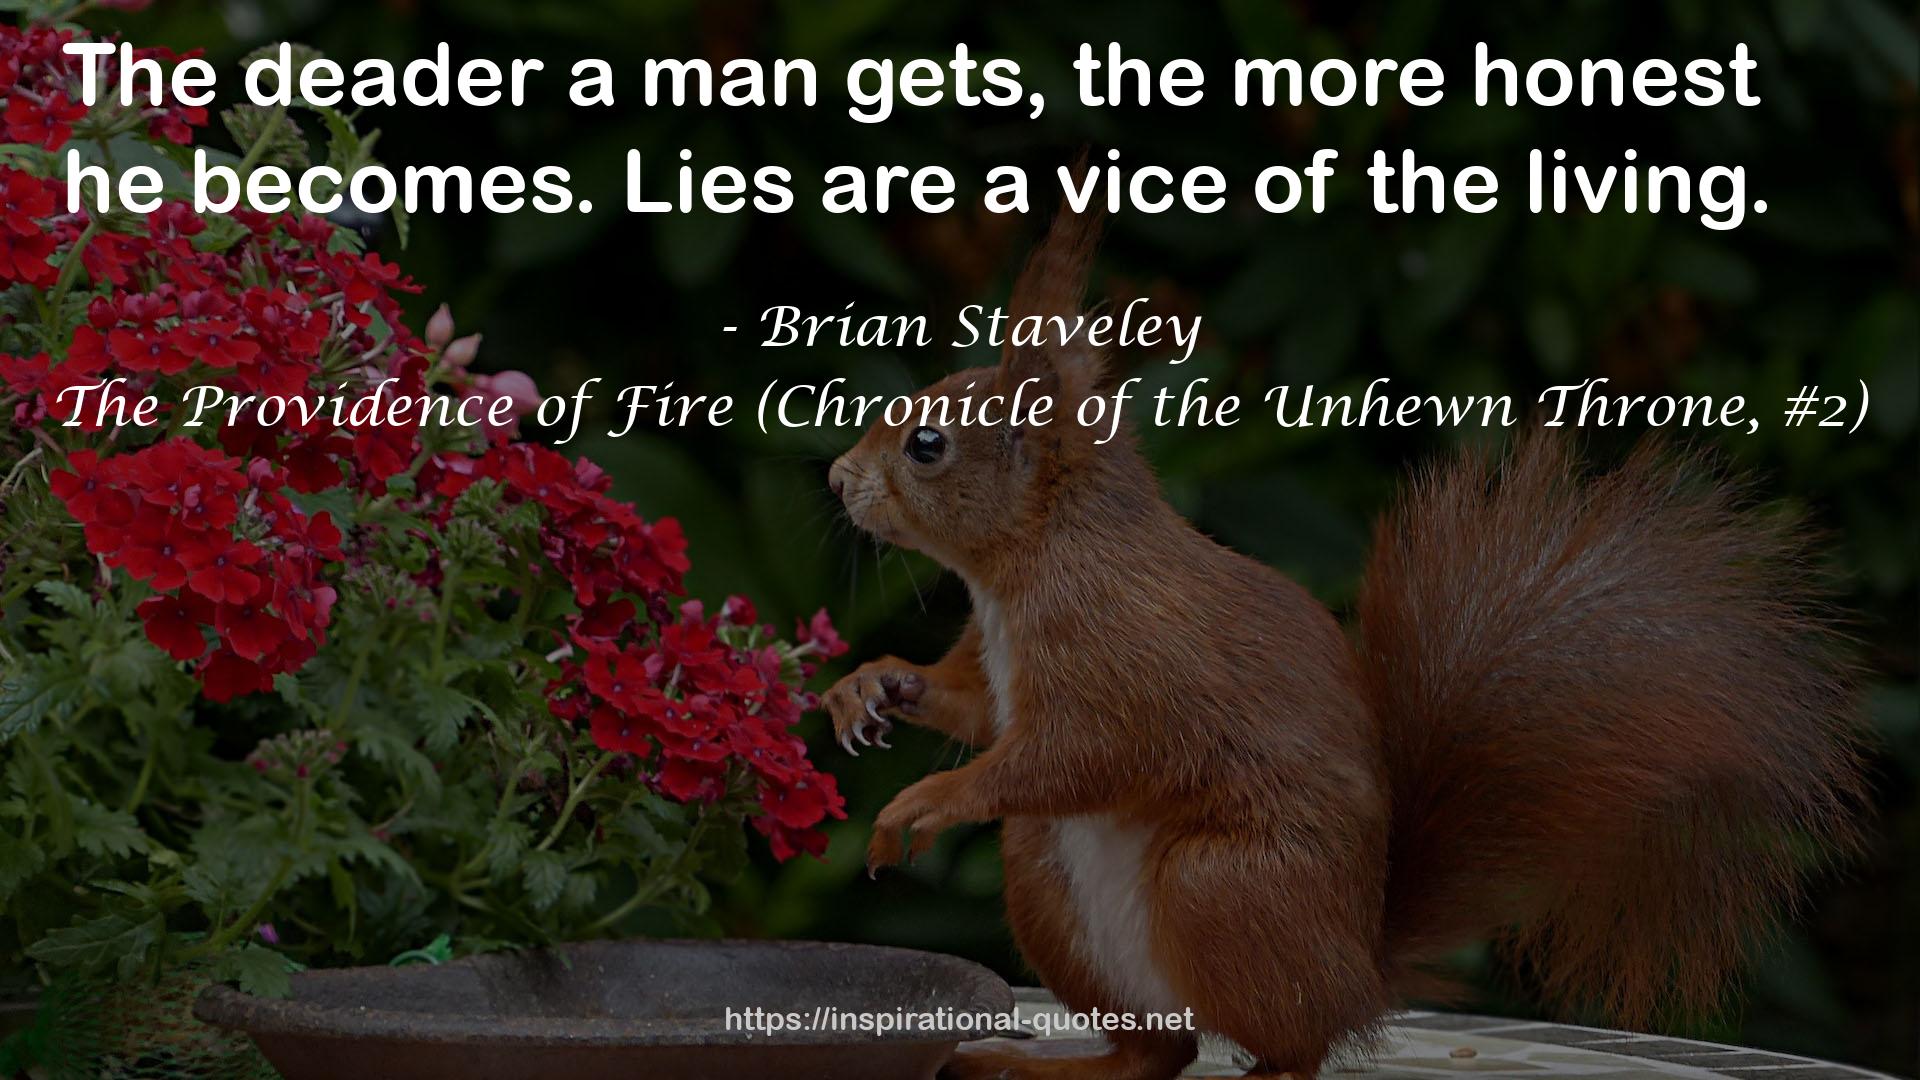 The Providence of Fire (Chronicle of the Unhewn Throne, #2) QUOTES